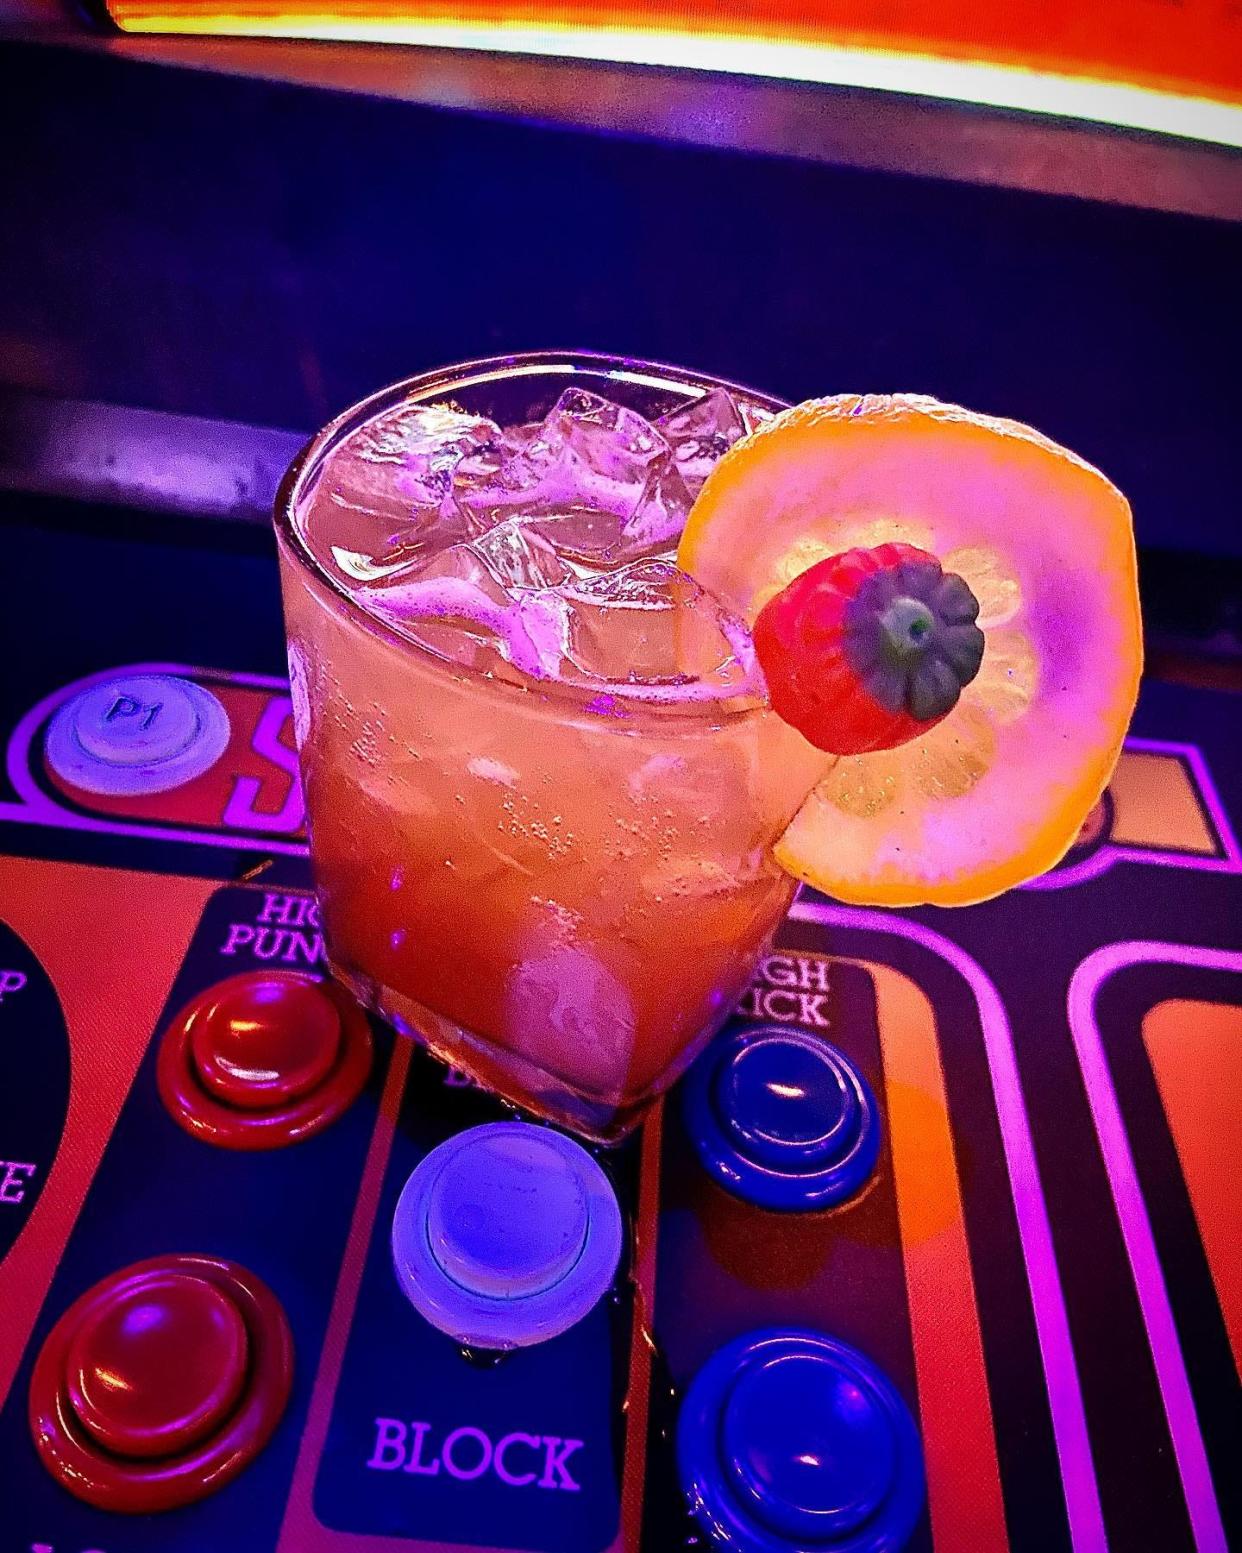 Play Arcade's Children of the Korn cocktail is a Candy-Corn Infused Vodka, lemon juice, cinnamon simple syrup, soda, and a candy pumpkin on the rocks.